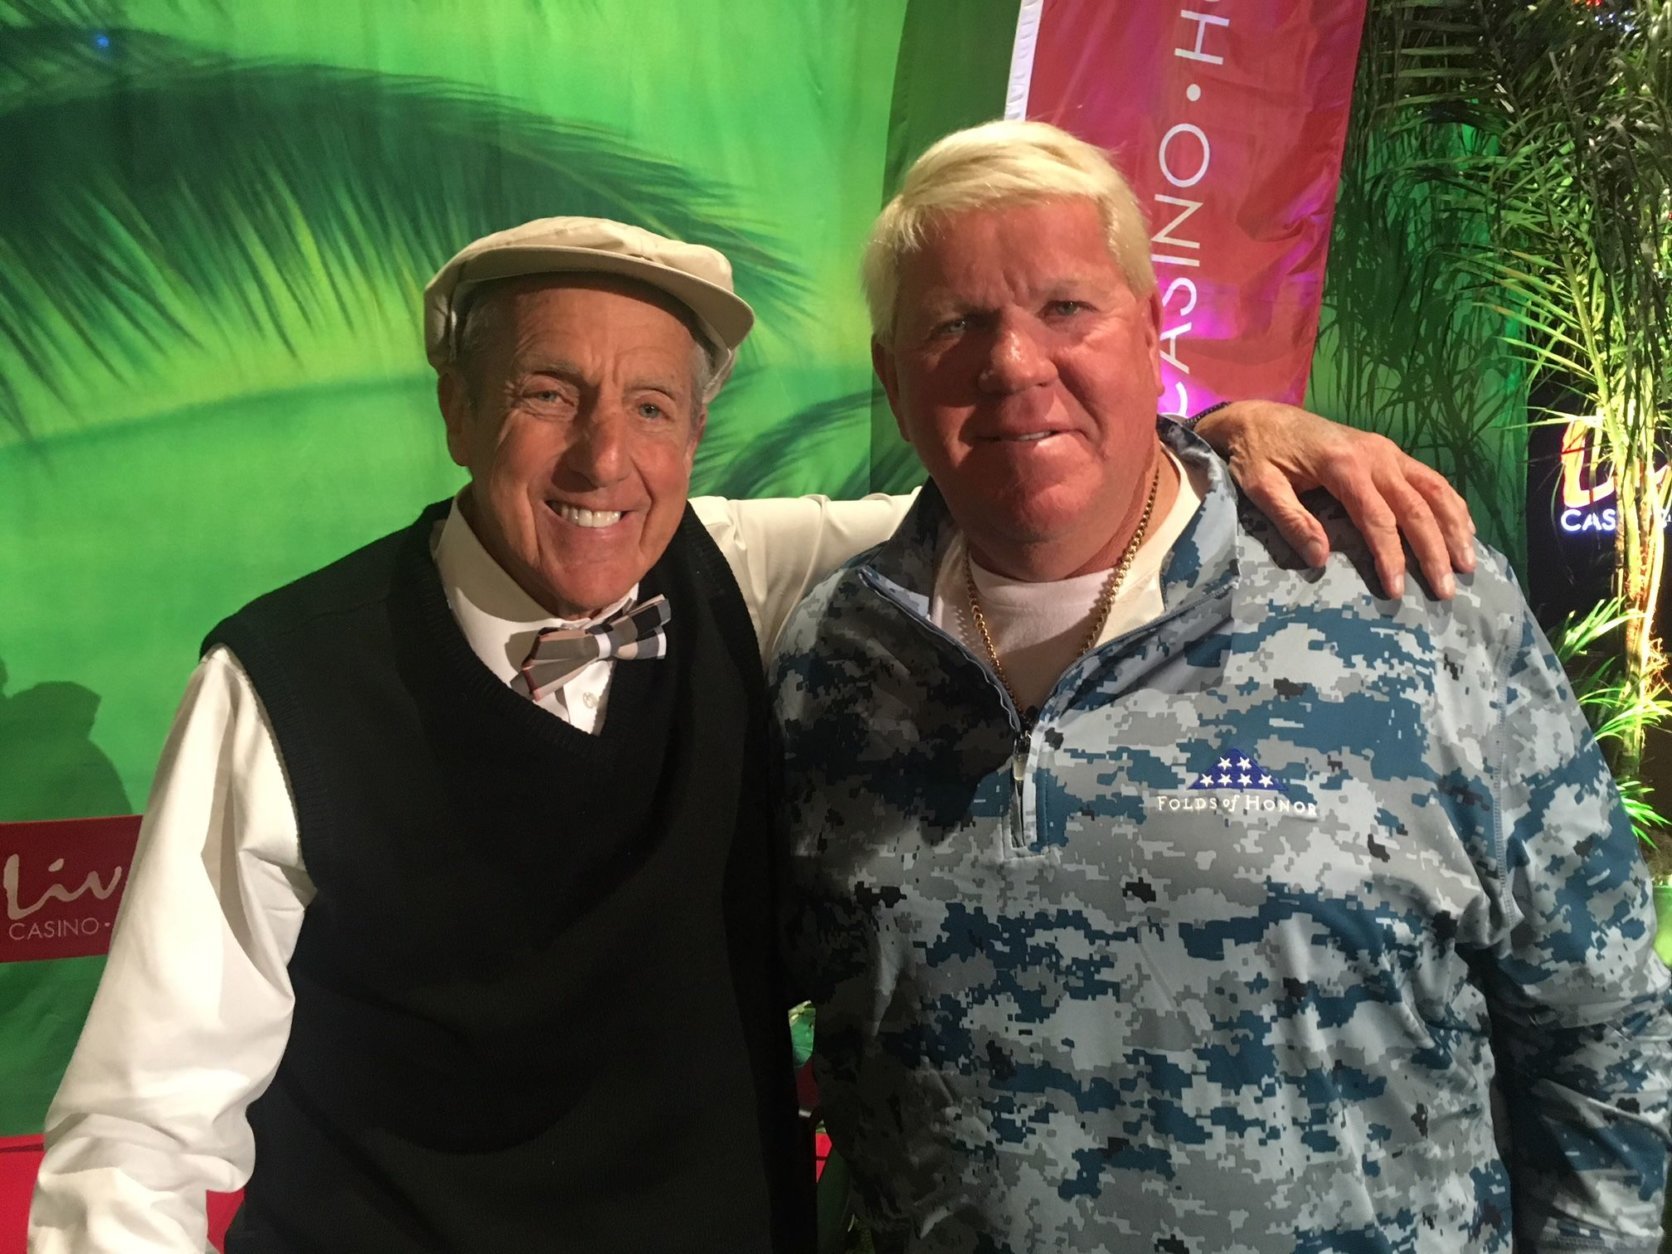 John Daly (right) joined Live! Casino owner David Cordish for a putt-off last week. (WTOP/Noah Frank)